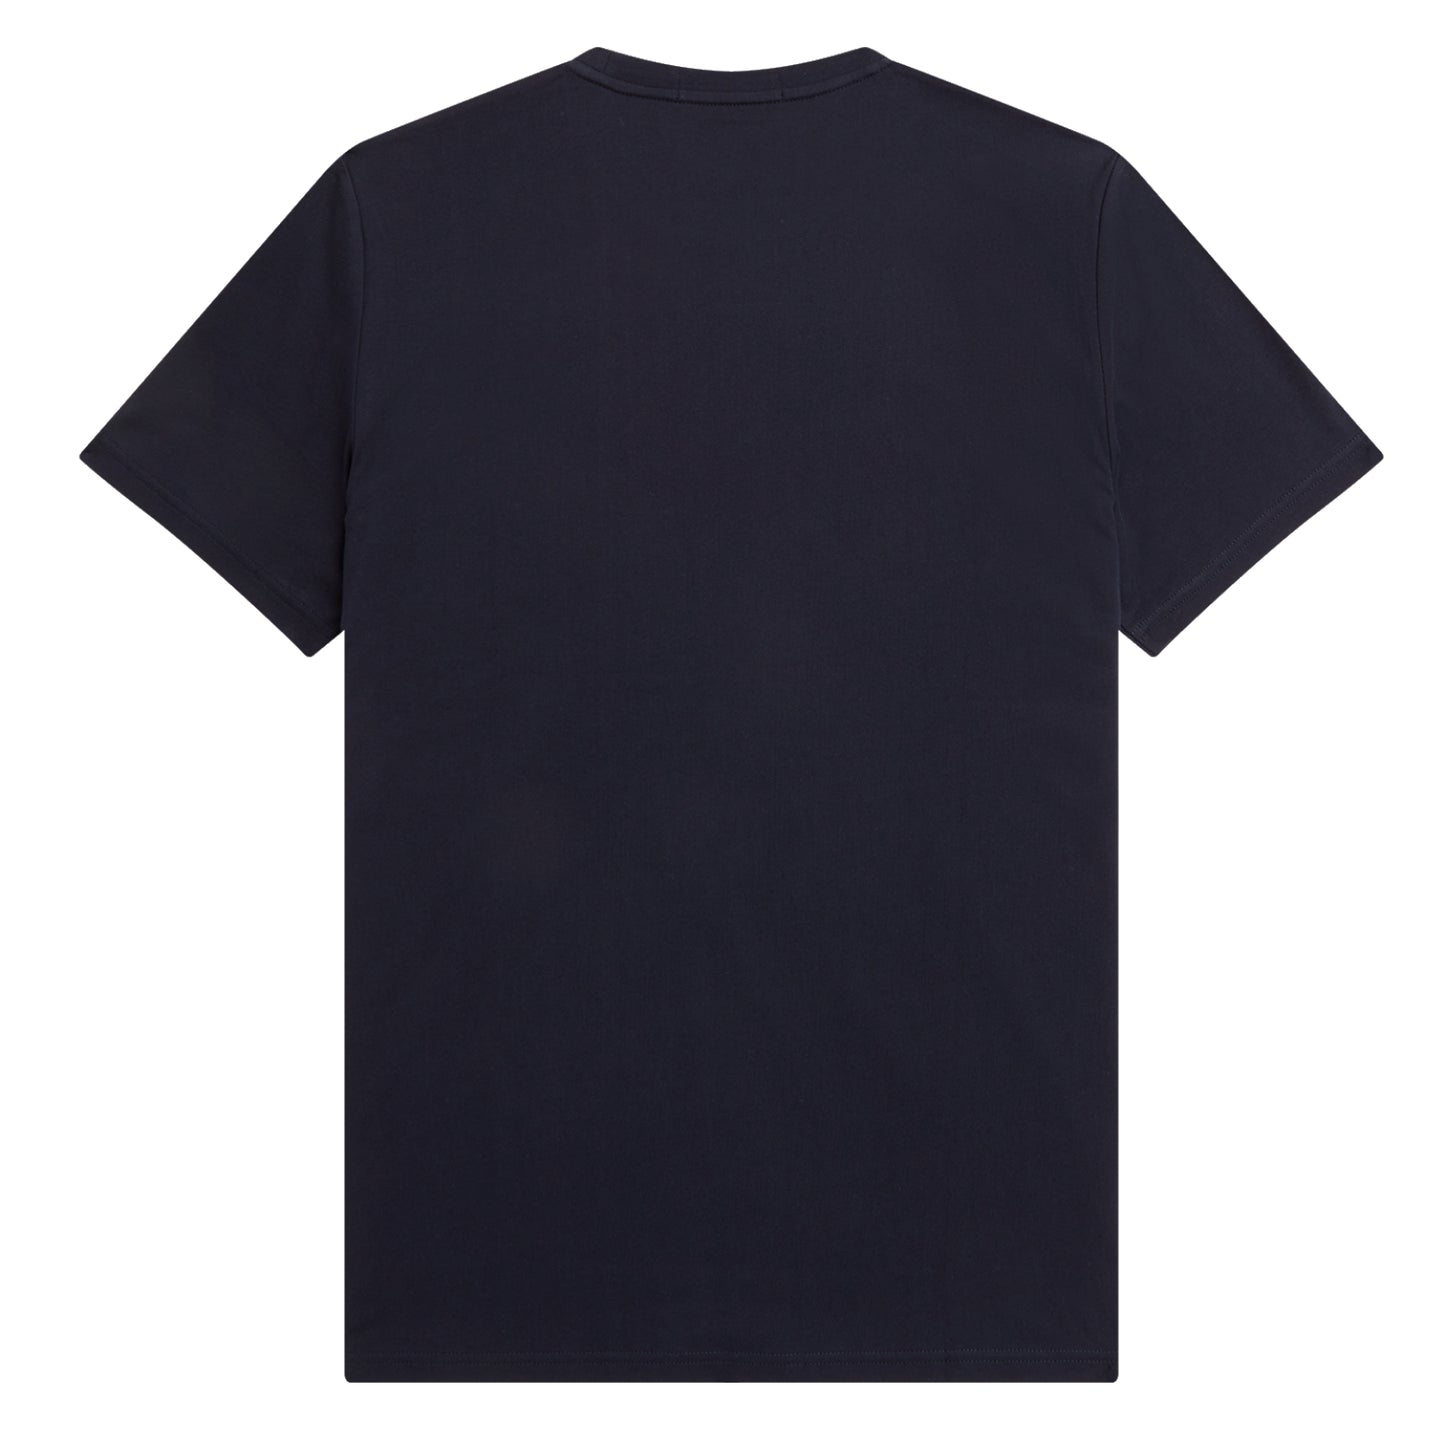 Fred Perry Laurel Wreath Graphic T-Shirt Navy